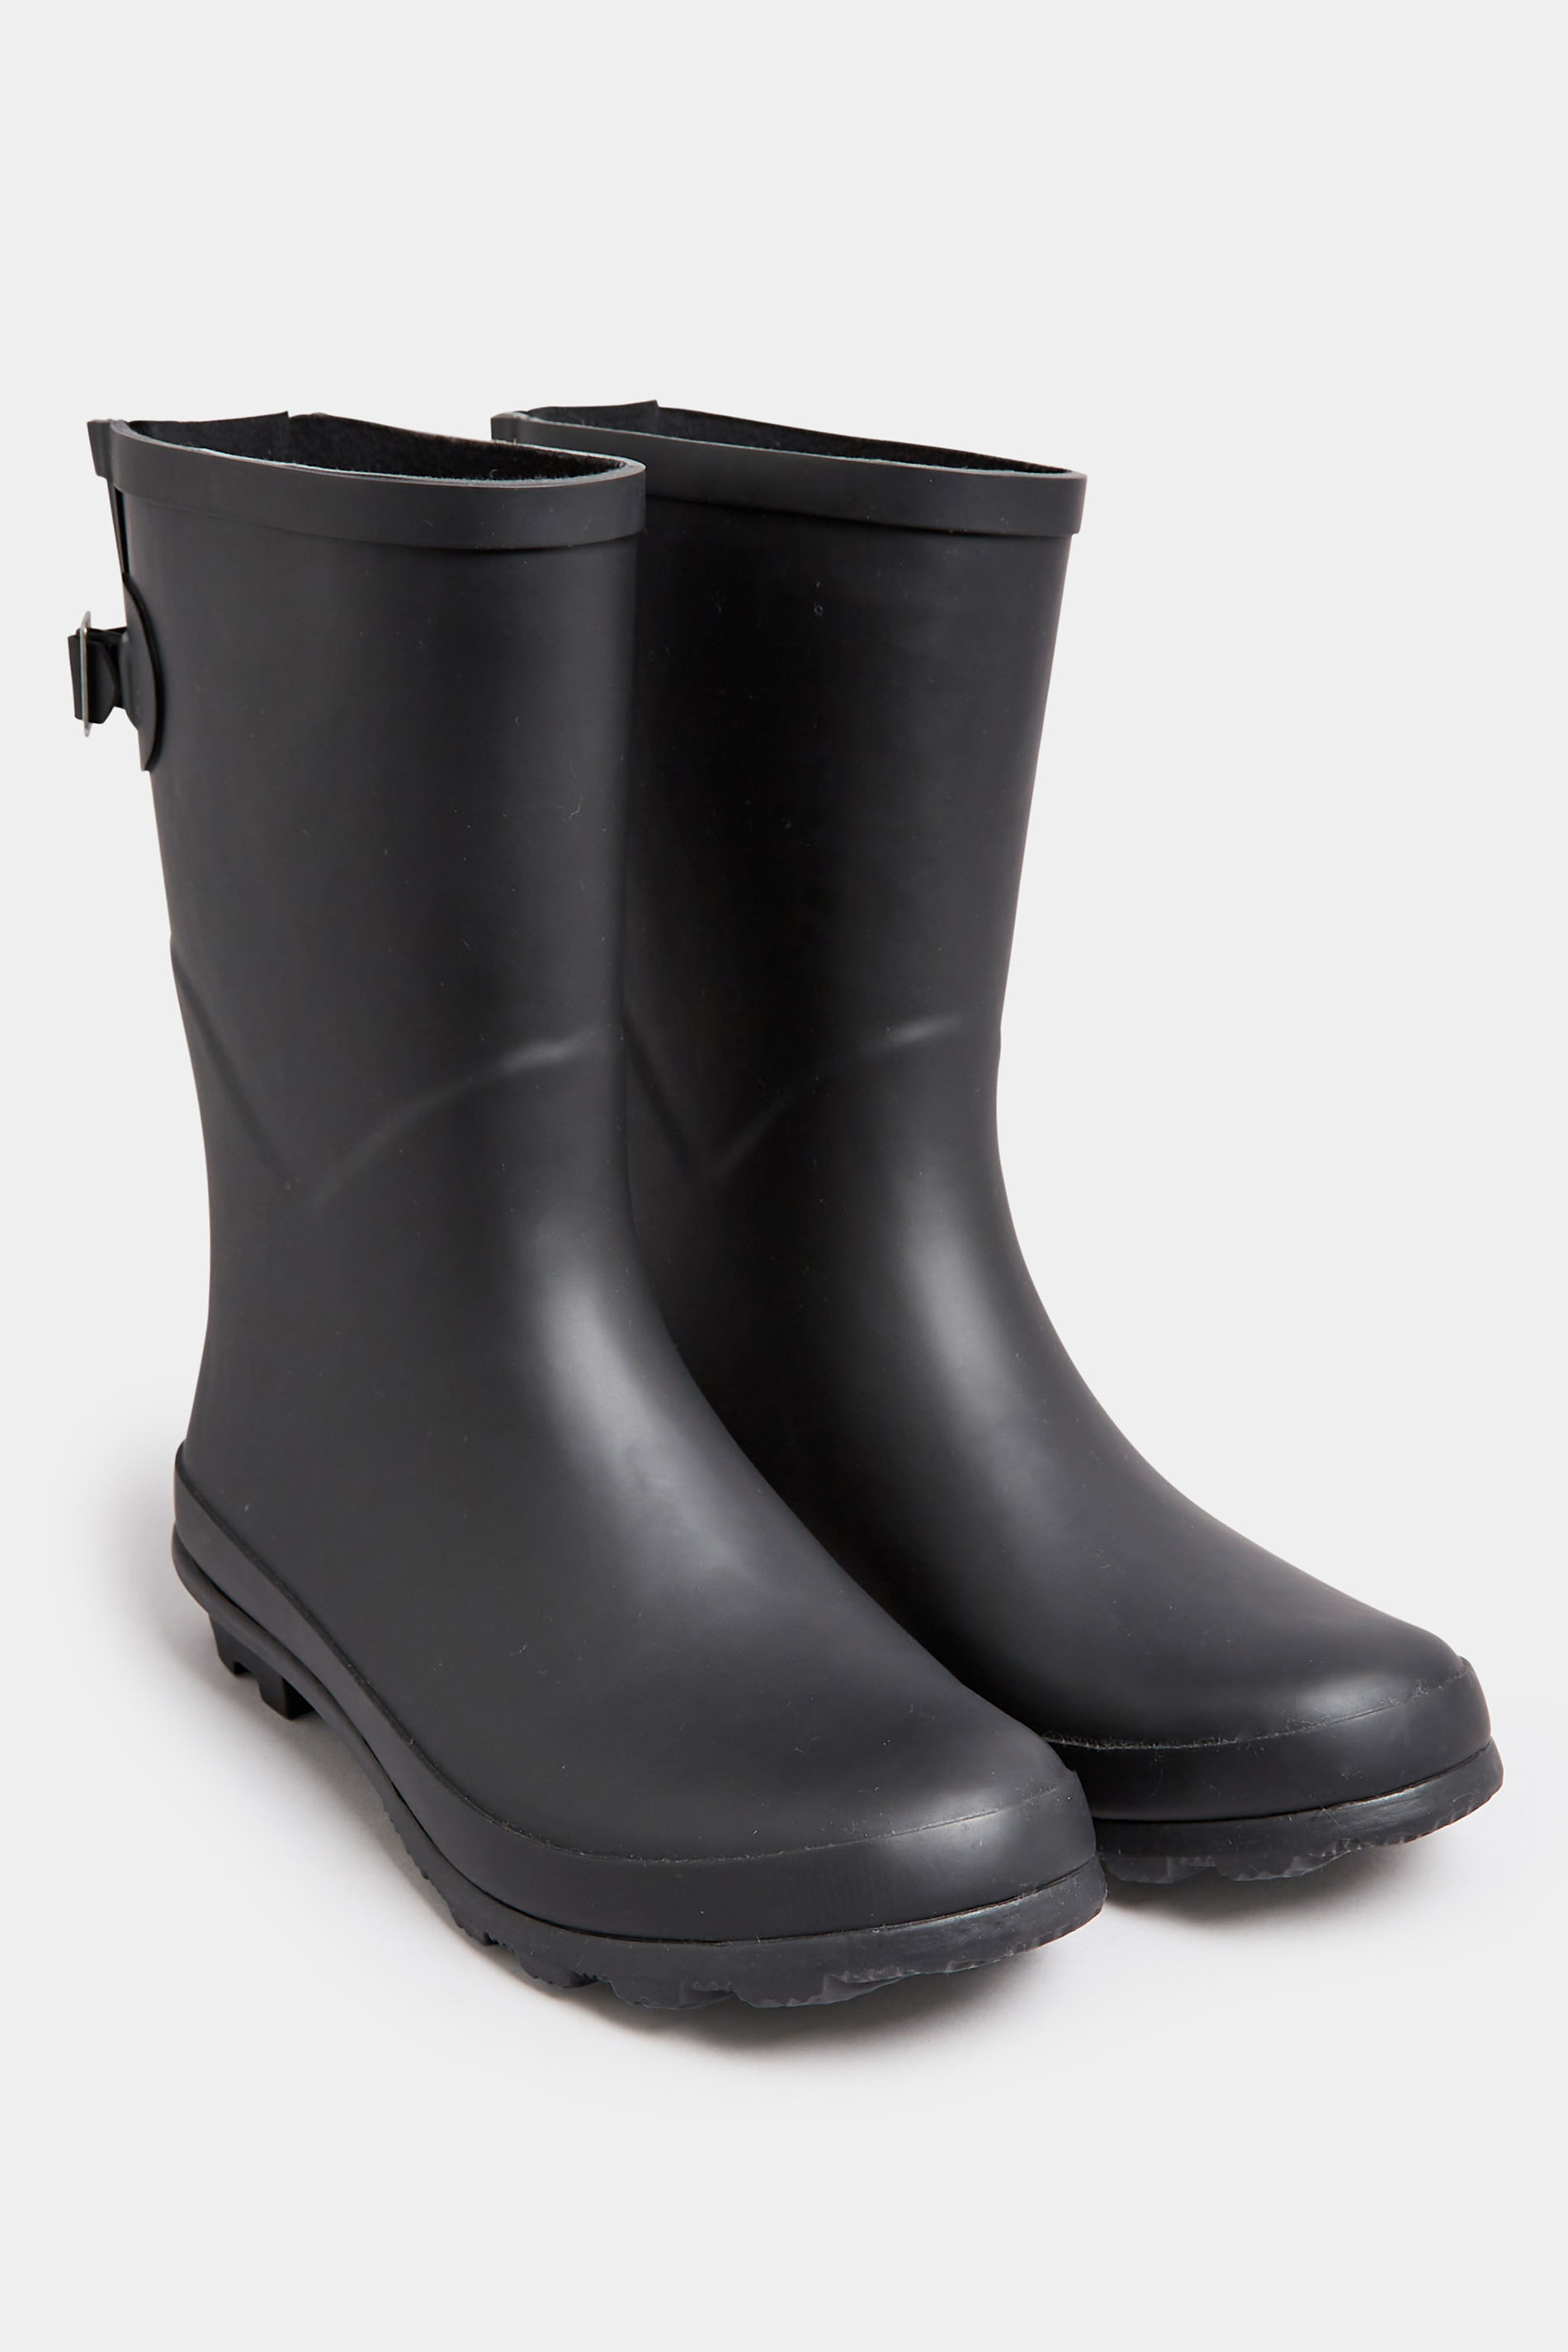 Black Mid Calf Wellies In Wide E Fit | Yours Clothing 2